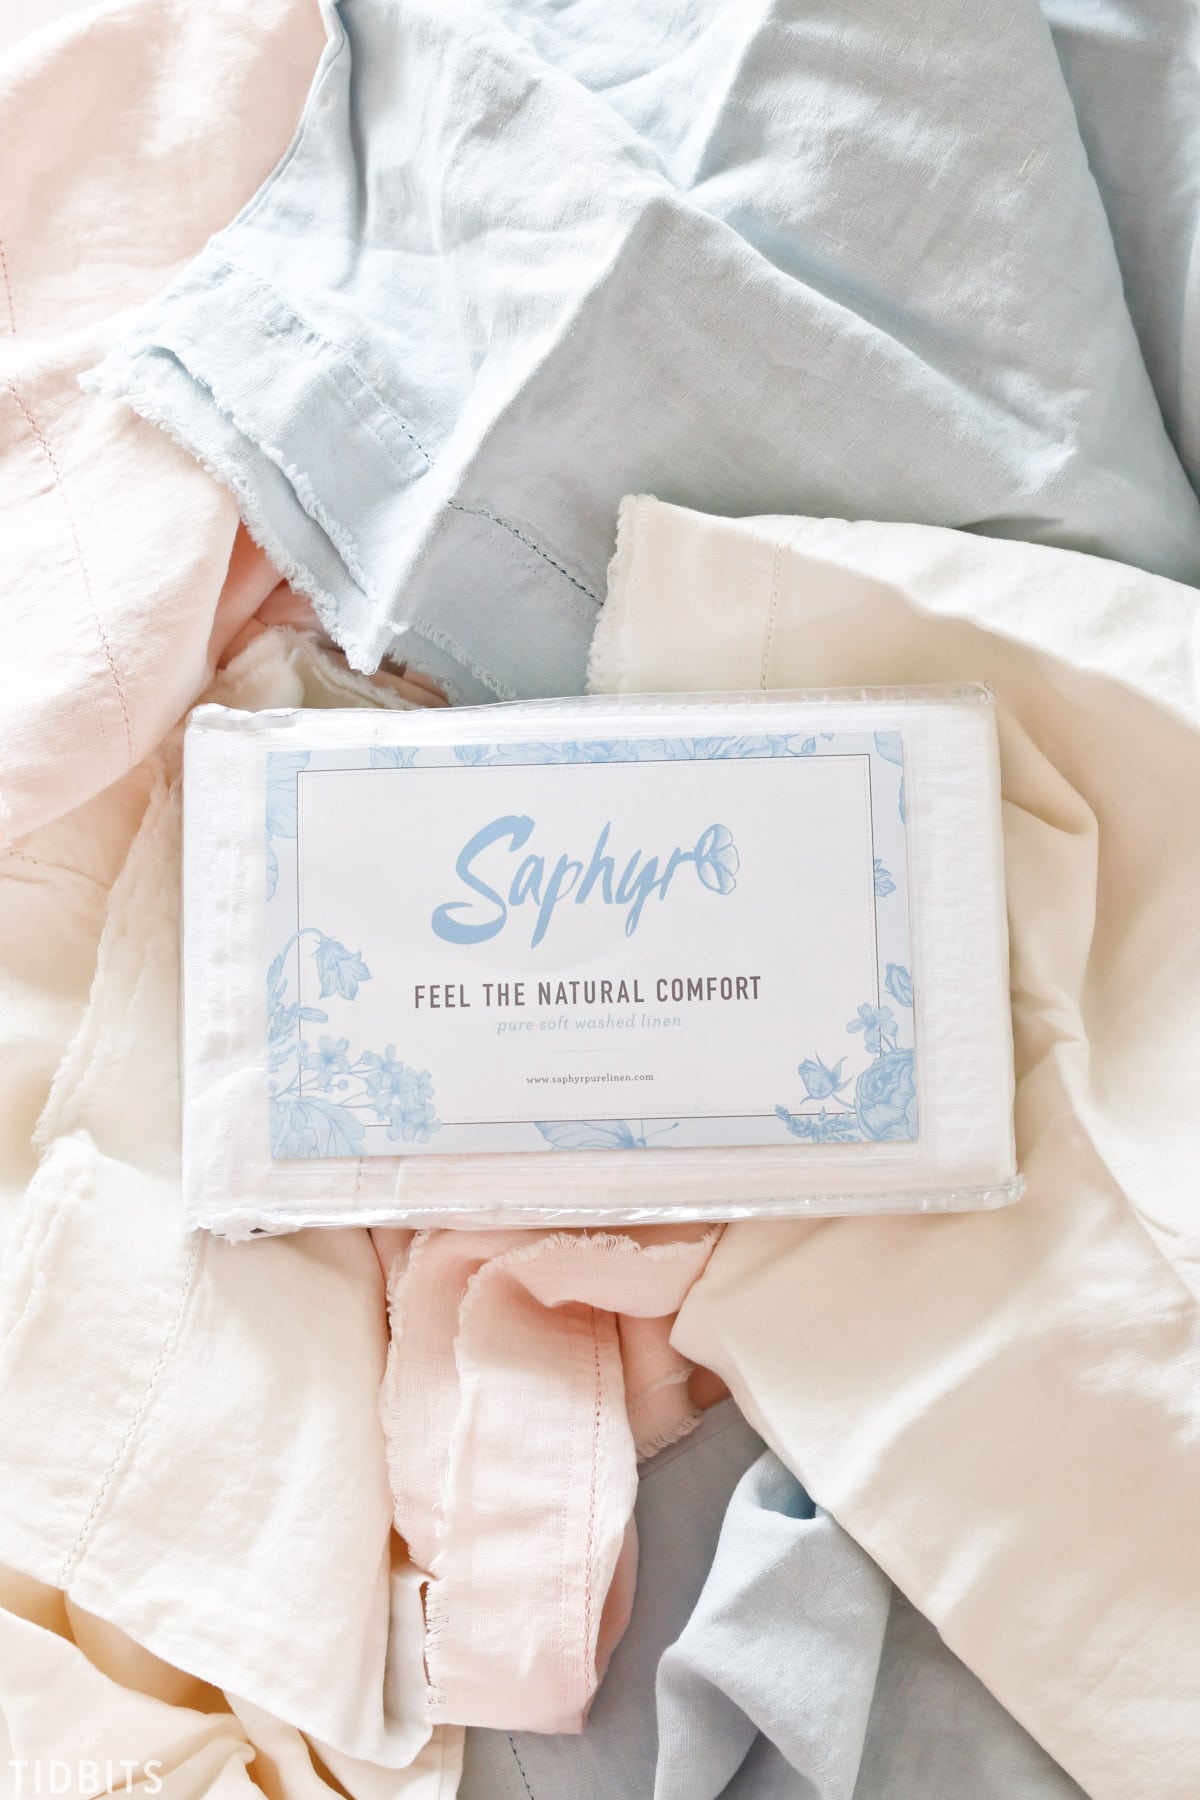 Saphyr Pure French Linen sheets